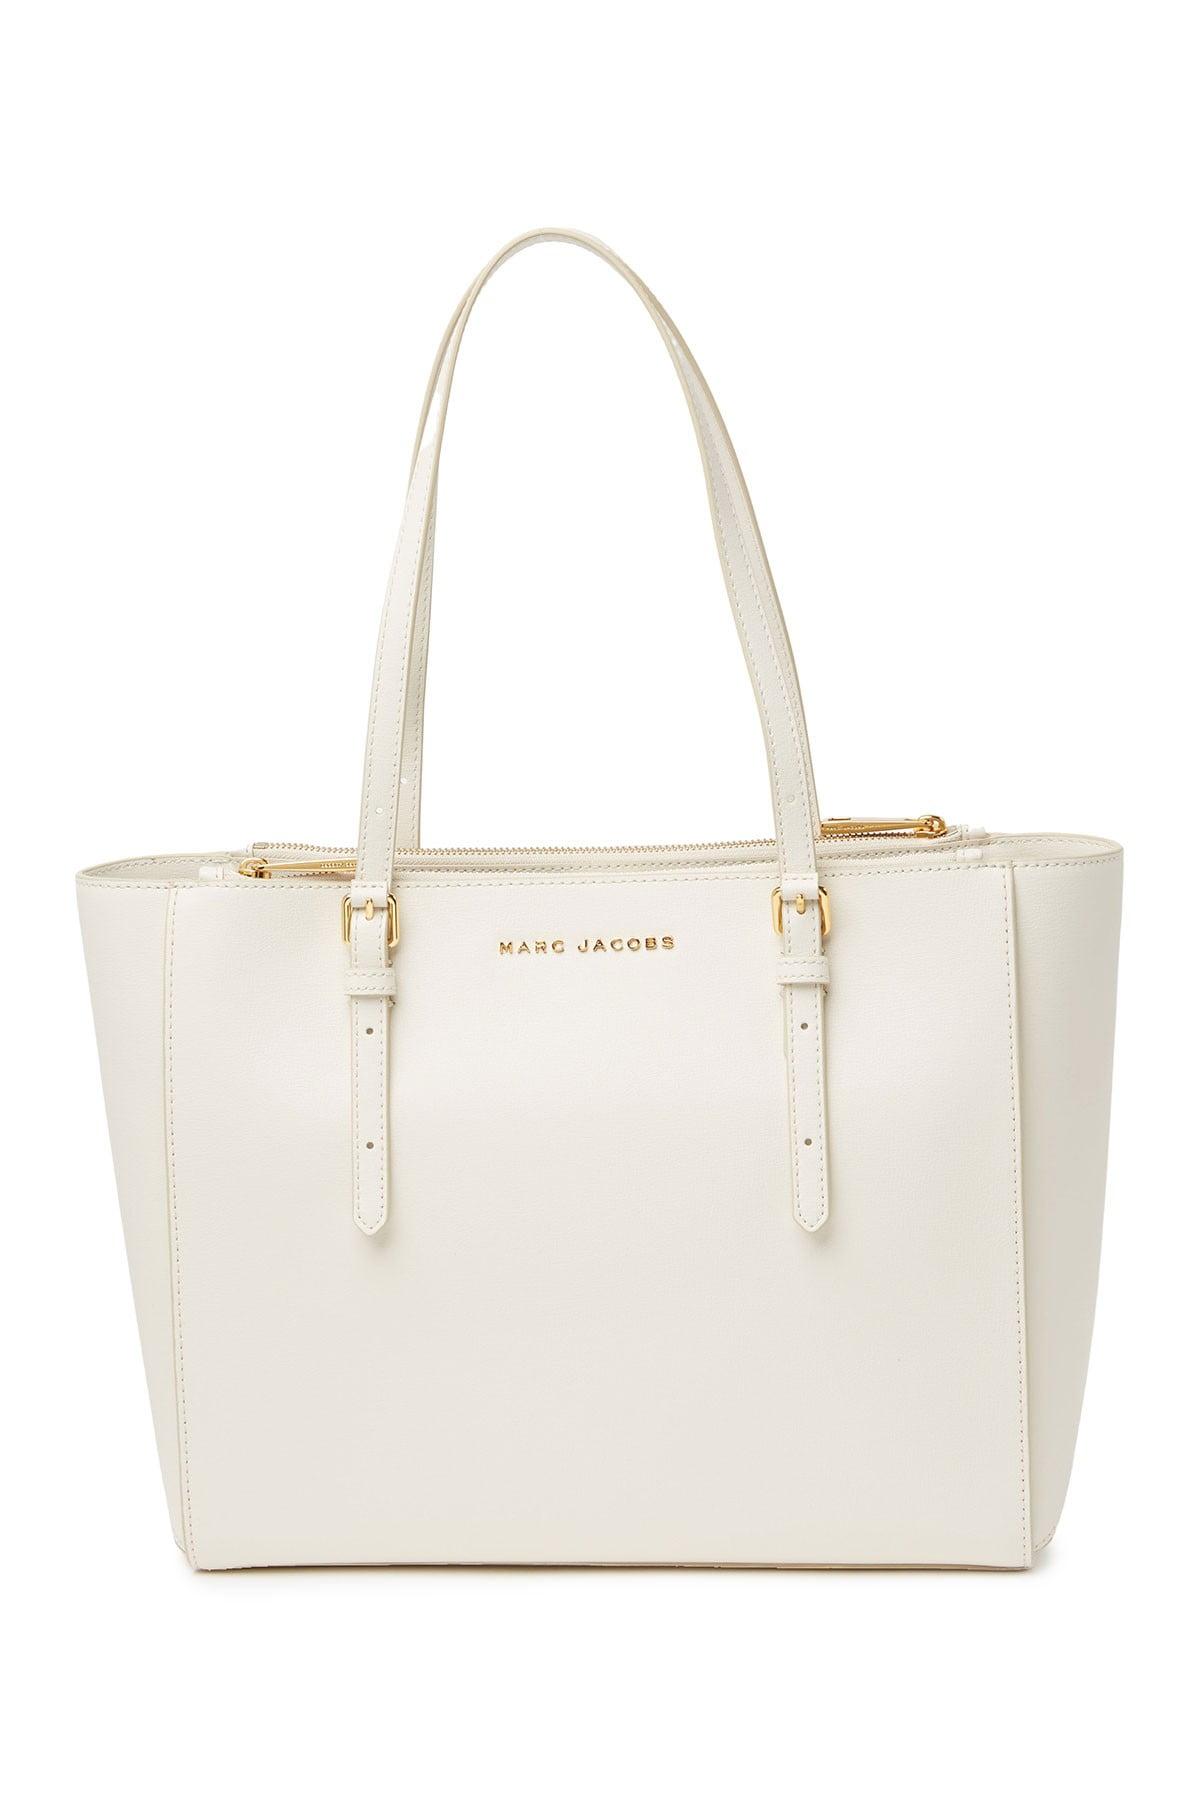 MARC JACOBS: The Tote Bag in leather - White  Marc Jacobs tote bags  H004L01PF21 online at